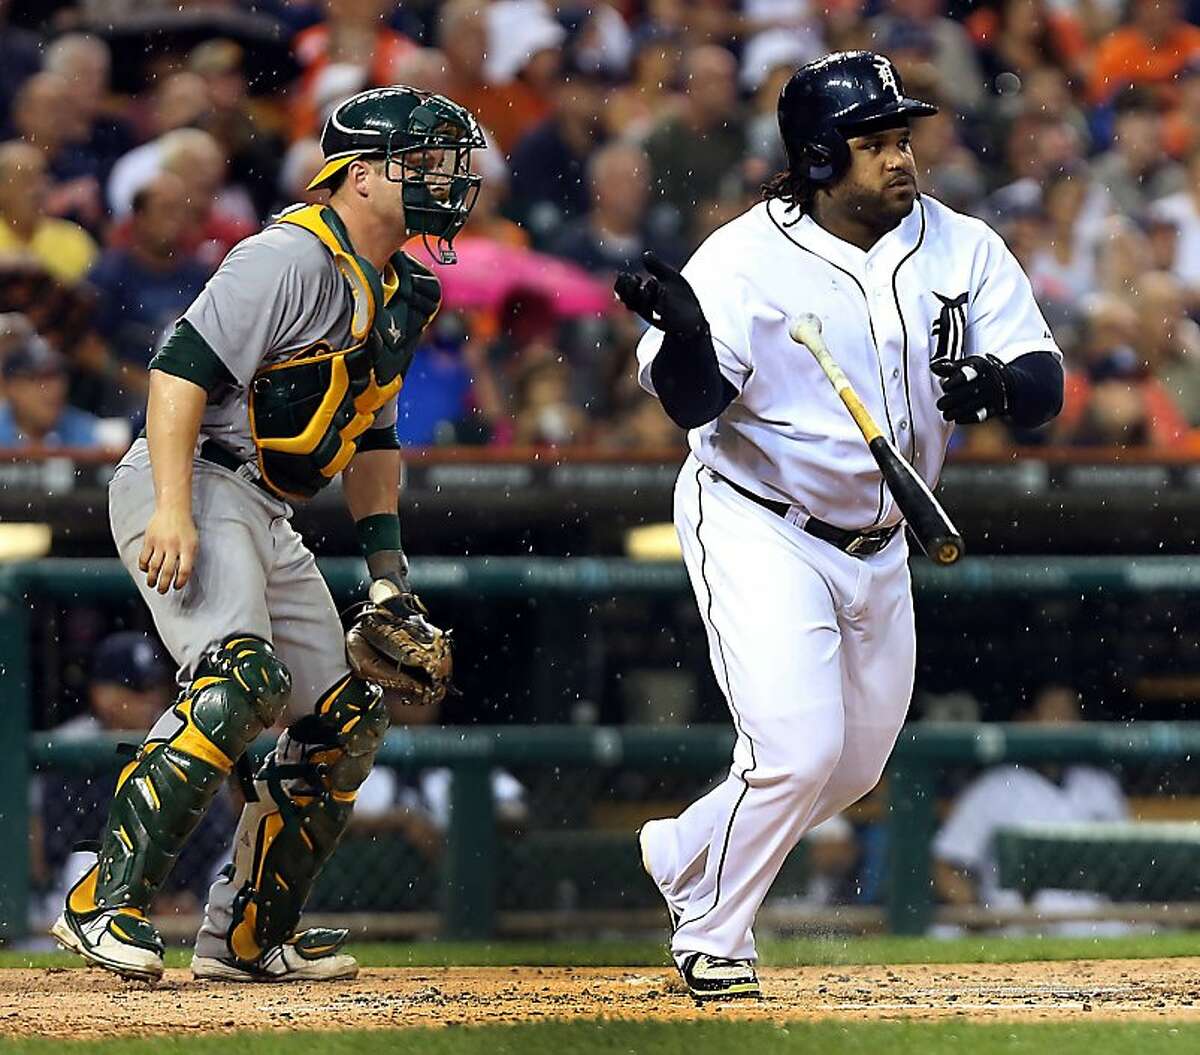 The Detroit Tigers' Prince Fielder drops his bat as he runs out a two-run single during first-inning action against the Oakland Athletics at Comerica Park in Detroit, Michigan, on Tuesday, August 27, 2013. (Diane Weiss/Detroit Free Press/MCT)